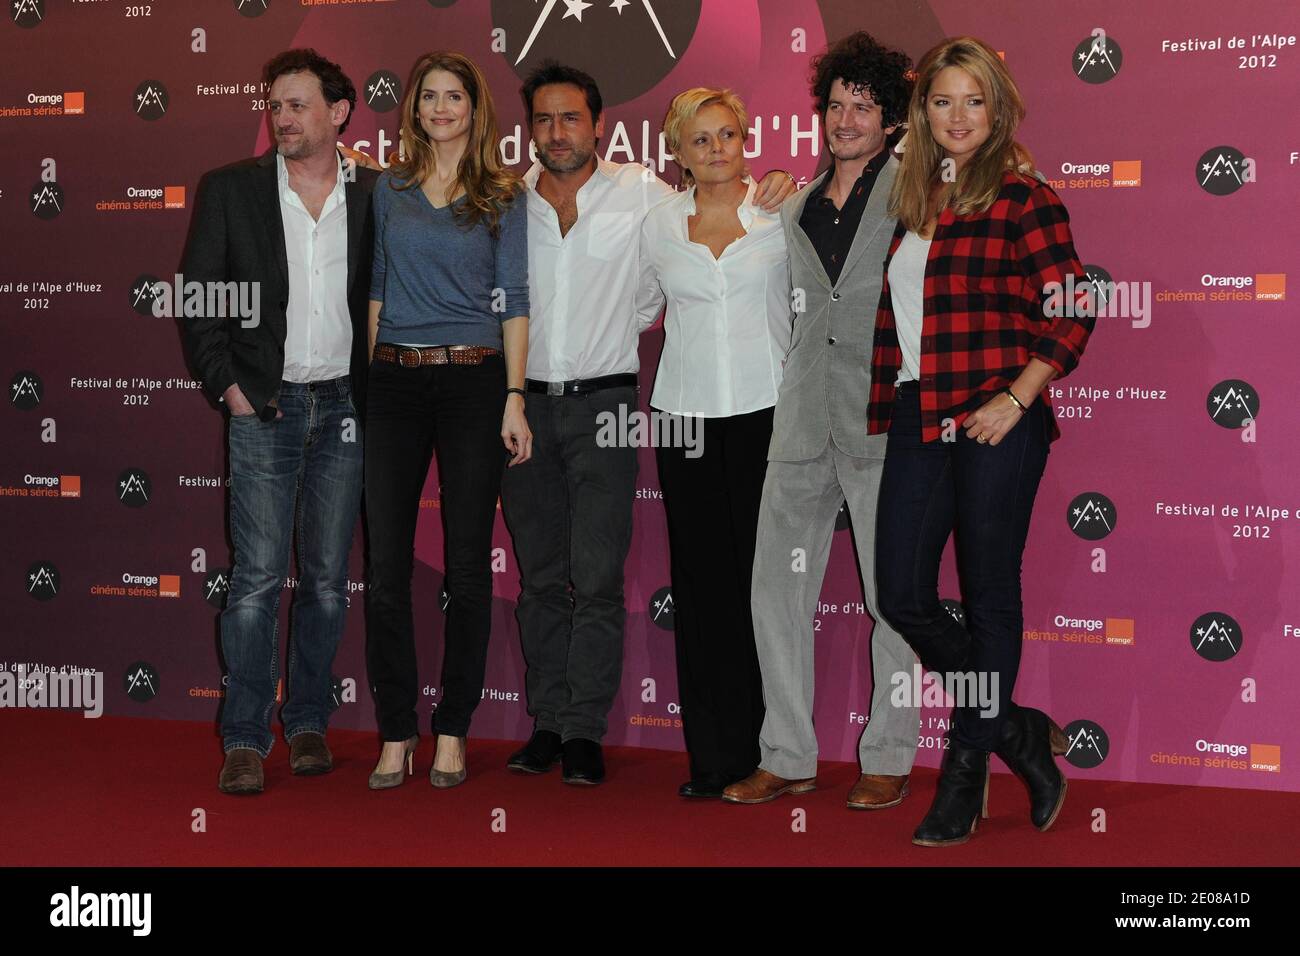 Jean-Paul Rouve, Alice Taglioni, Gilles Lellouche, Muriel Robin, Clement  Sibony and Virginie Efira attend the opening ceremony photocall at the  festival of l'Alpe d'Huez, on January 17th, 2012, in l'Alpe d'Huez, France.